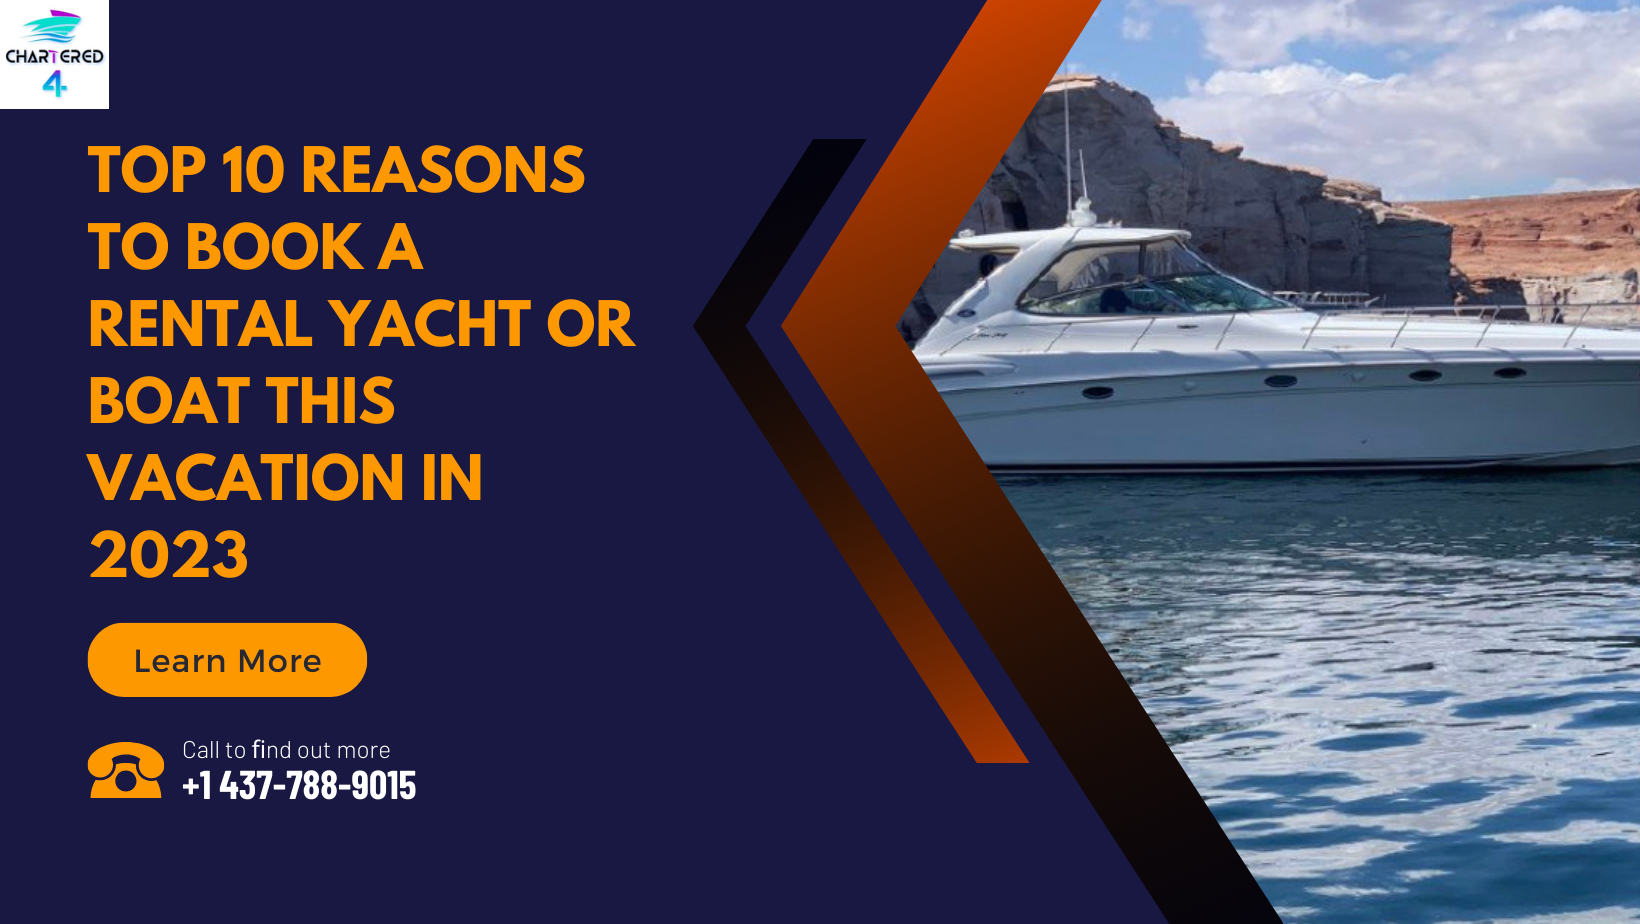 Top 10 Reasons To Book A Rental Yacht Or Boat This Vacation In 2023